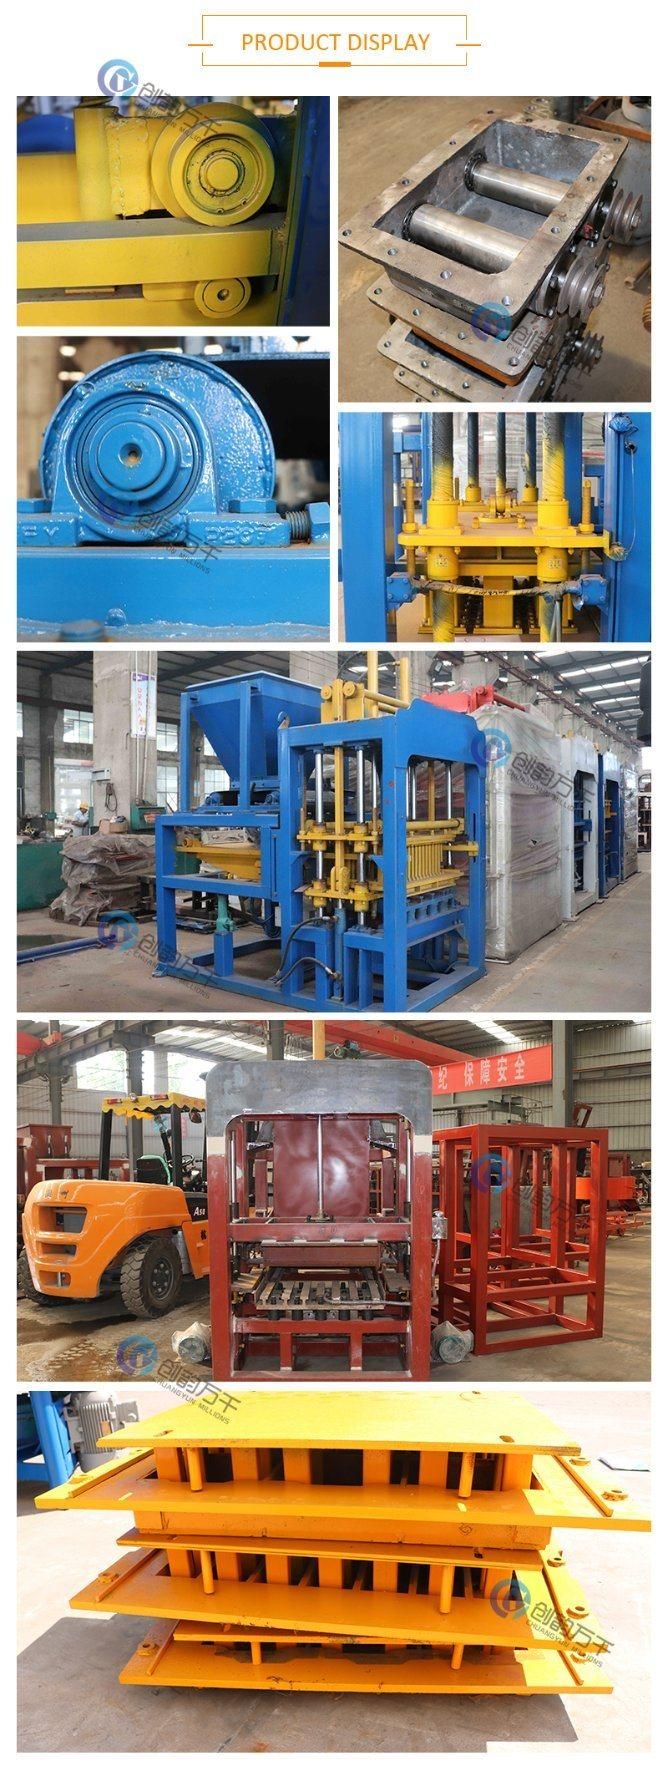 Qt4-15s Full Automatic Block Machine Production Line with High Density and Strength Block